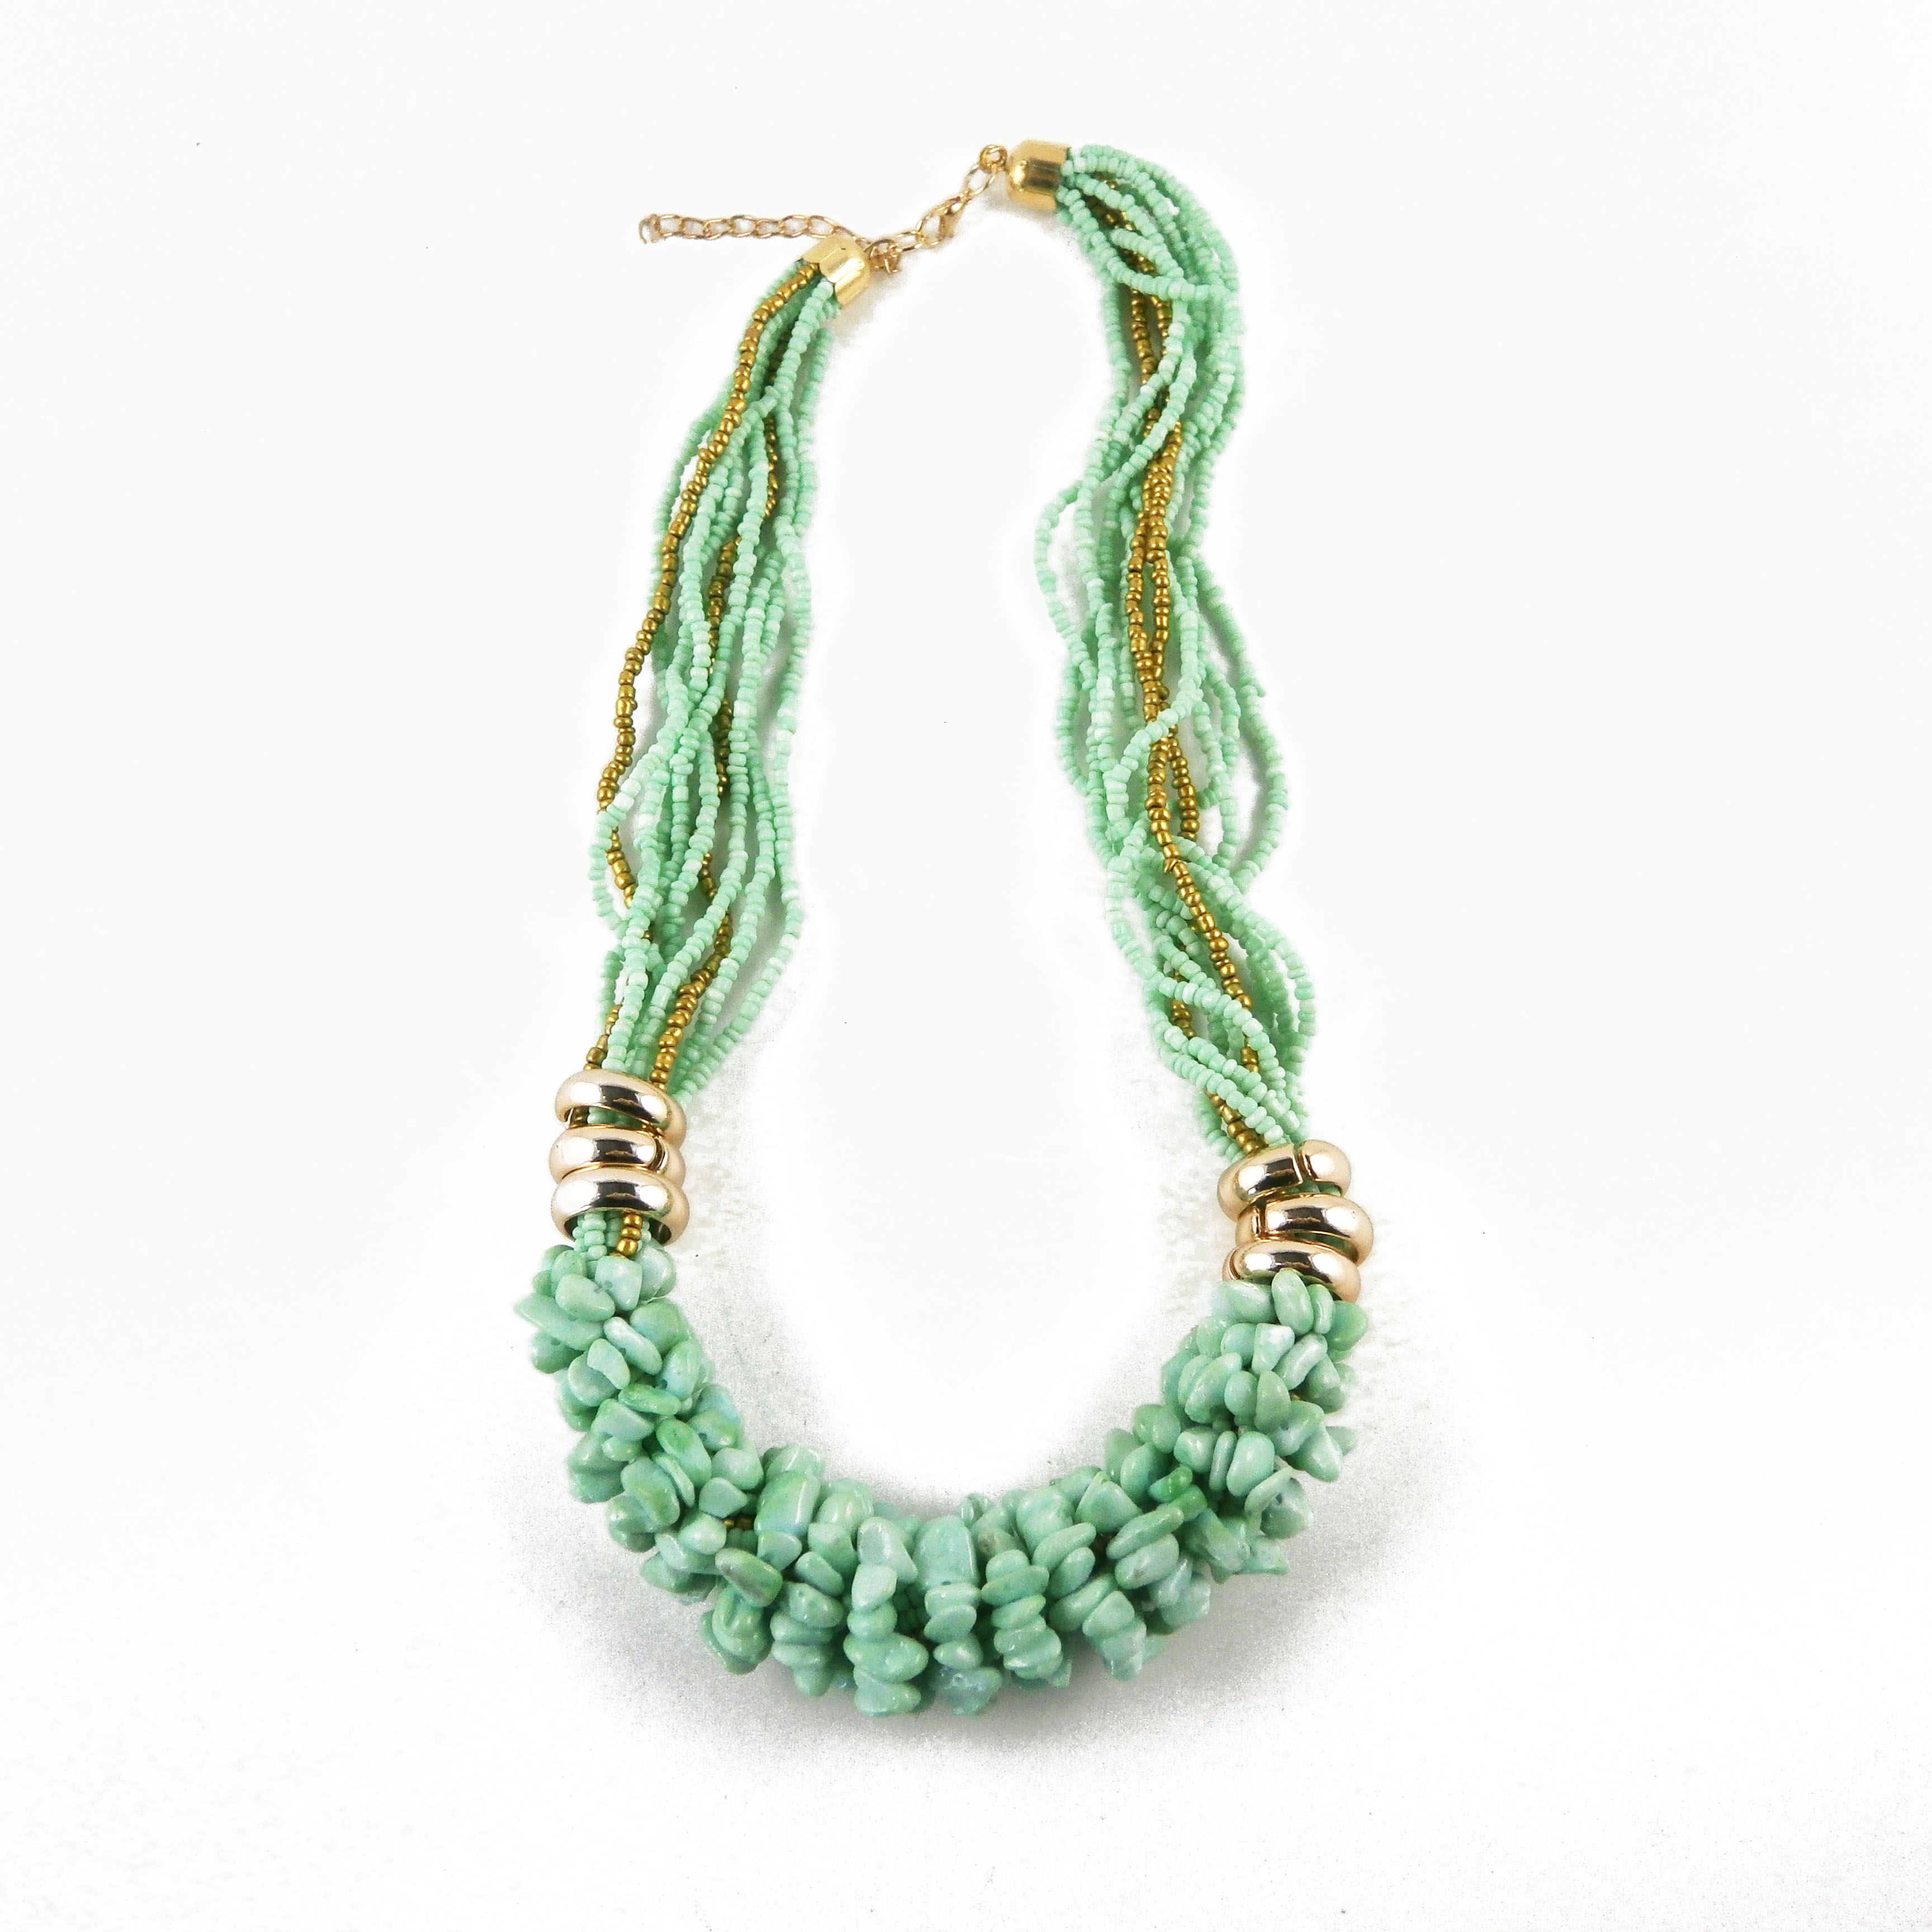 Fashion seed bead necklace